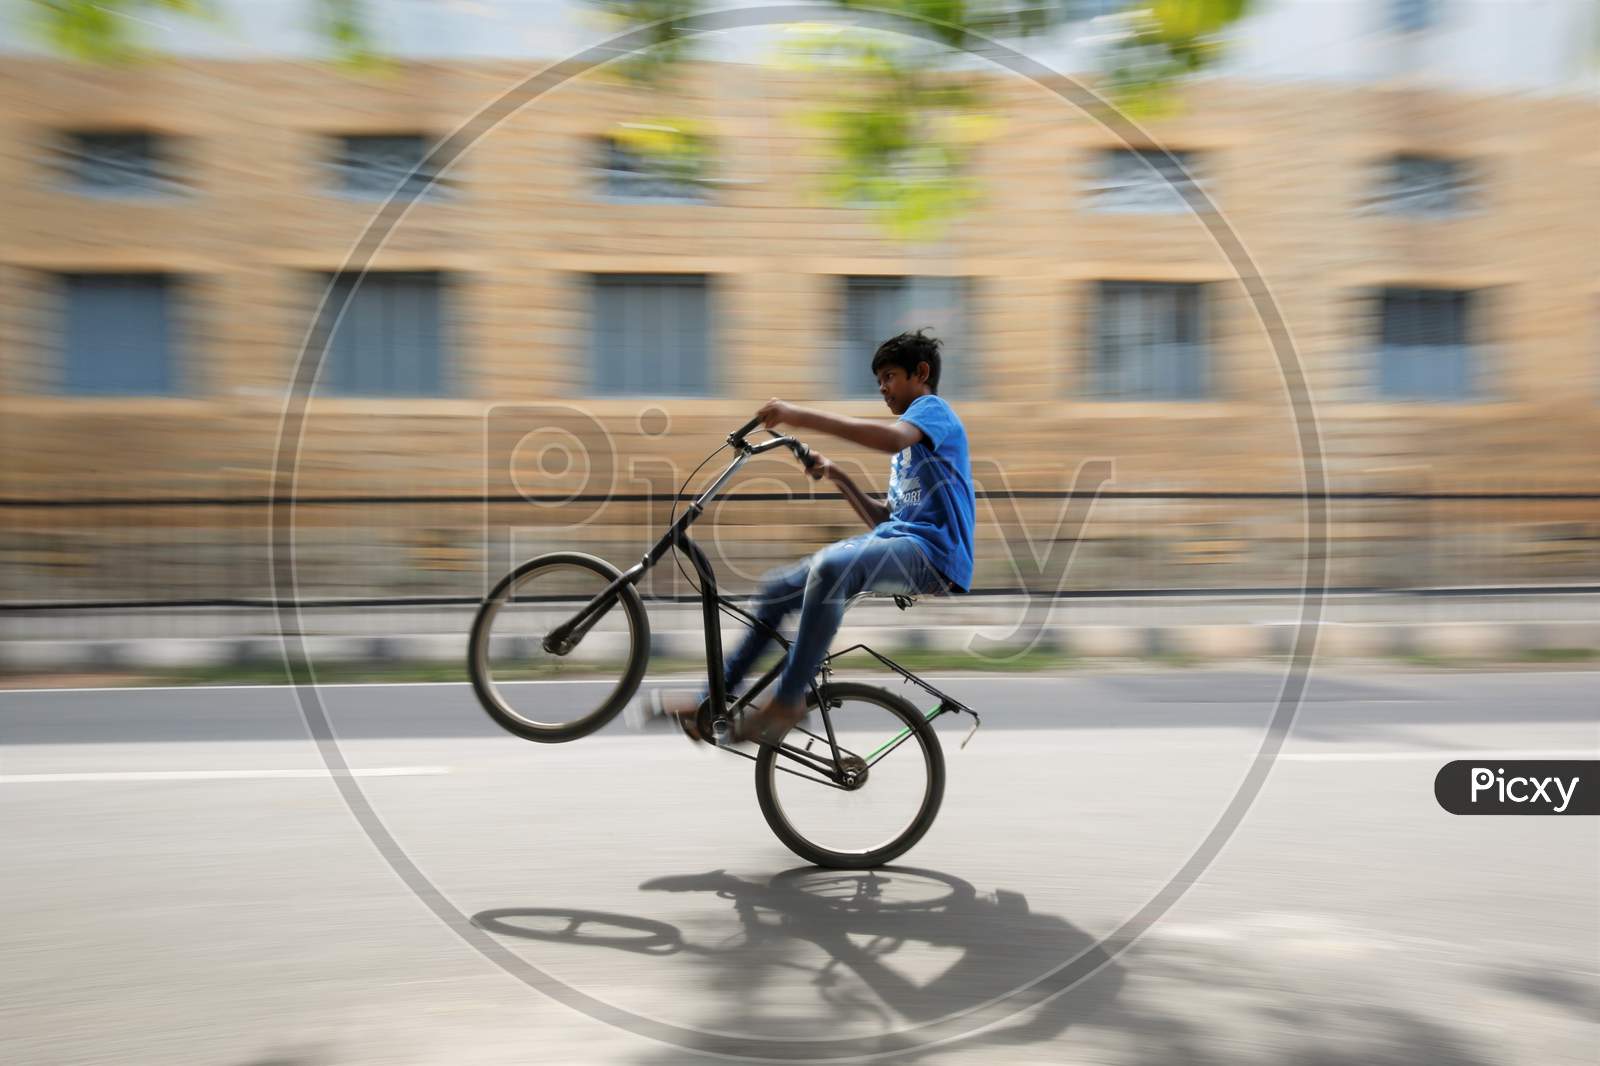 A boy rides a bicycle on an empty street during the nationwide lockdown to stop the spread of coronavirus (Covid-19) in Bangalore, India.